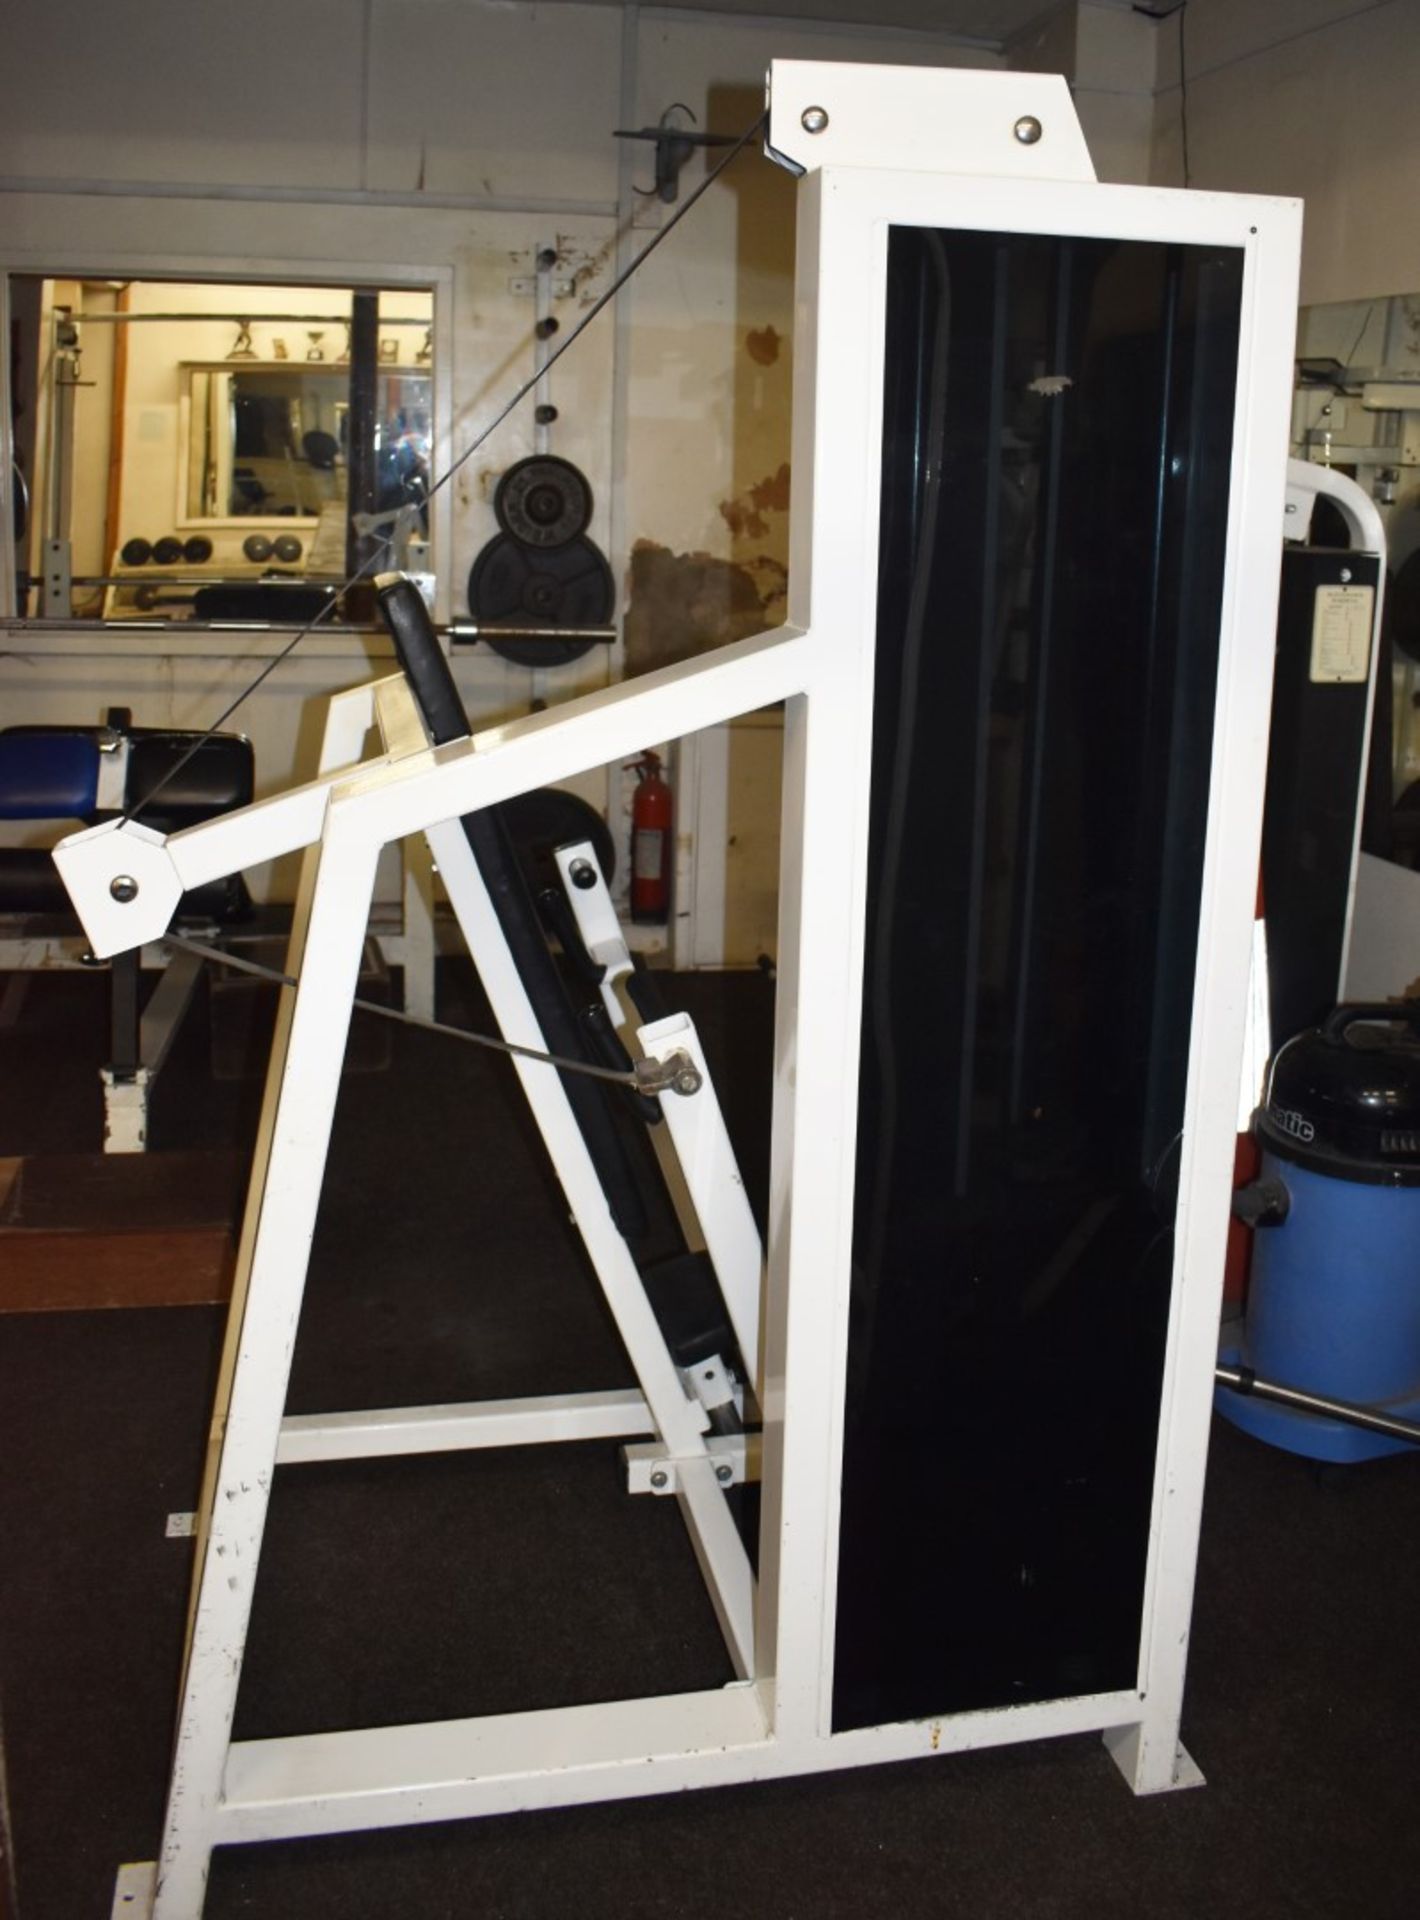 Contents of Bodybuilding and Strongman Gym - Includes Approx 30 Pieces of Gym Equipment, Floor Mats, - Image 12 of 95